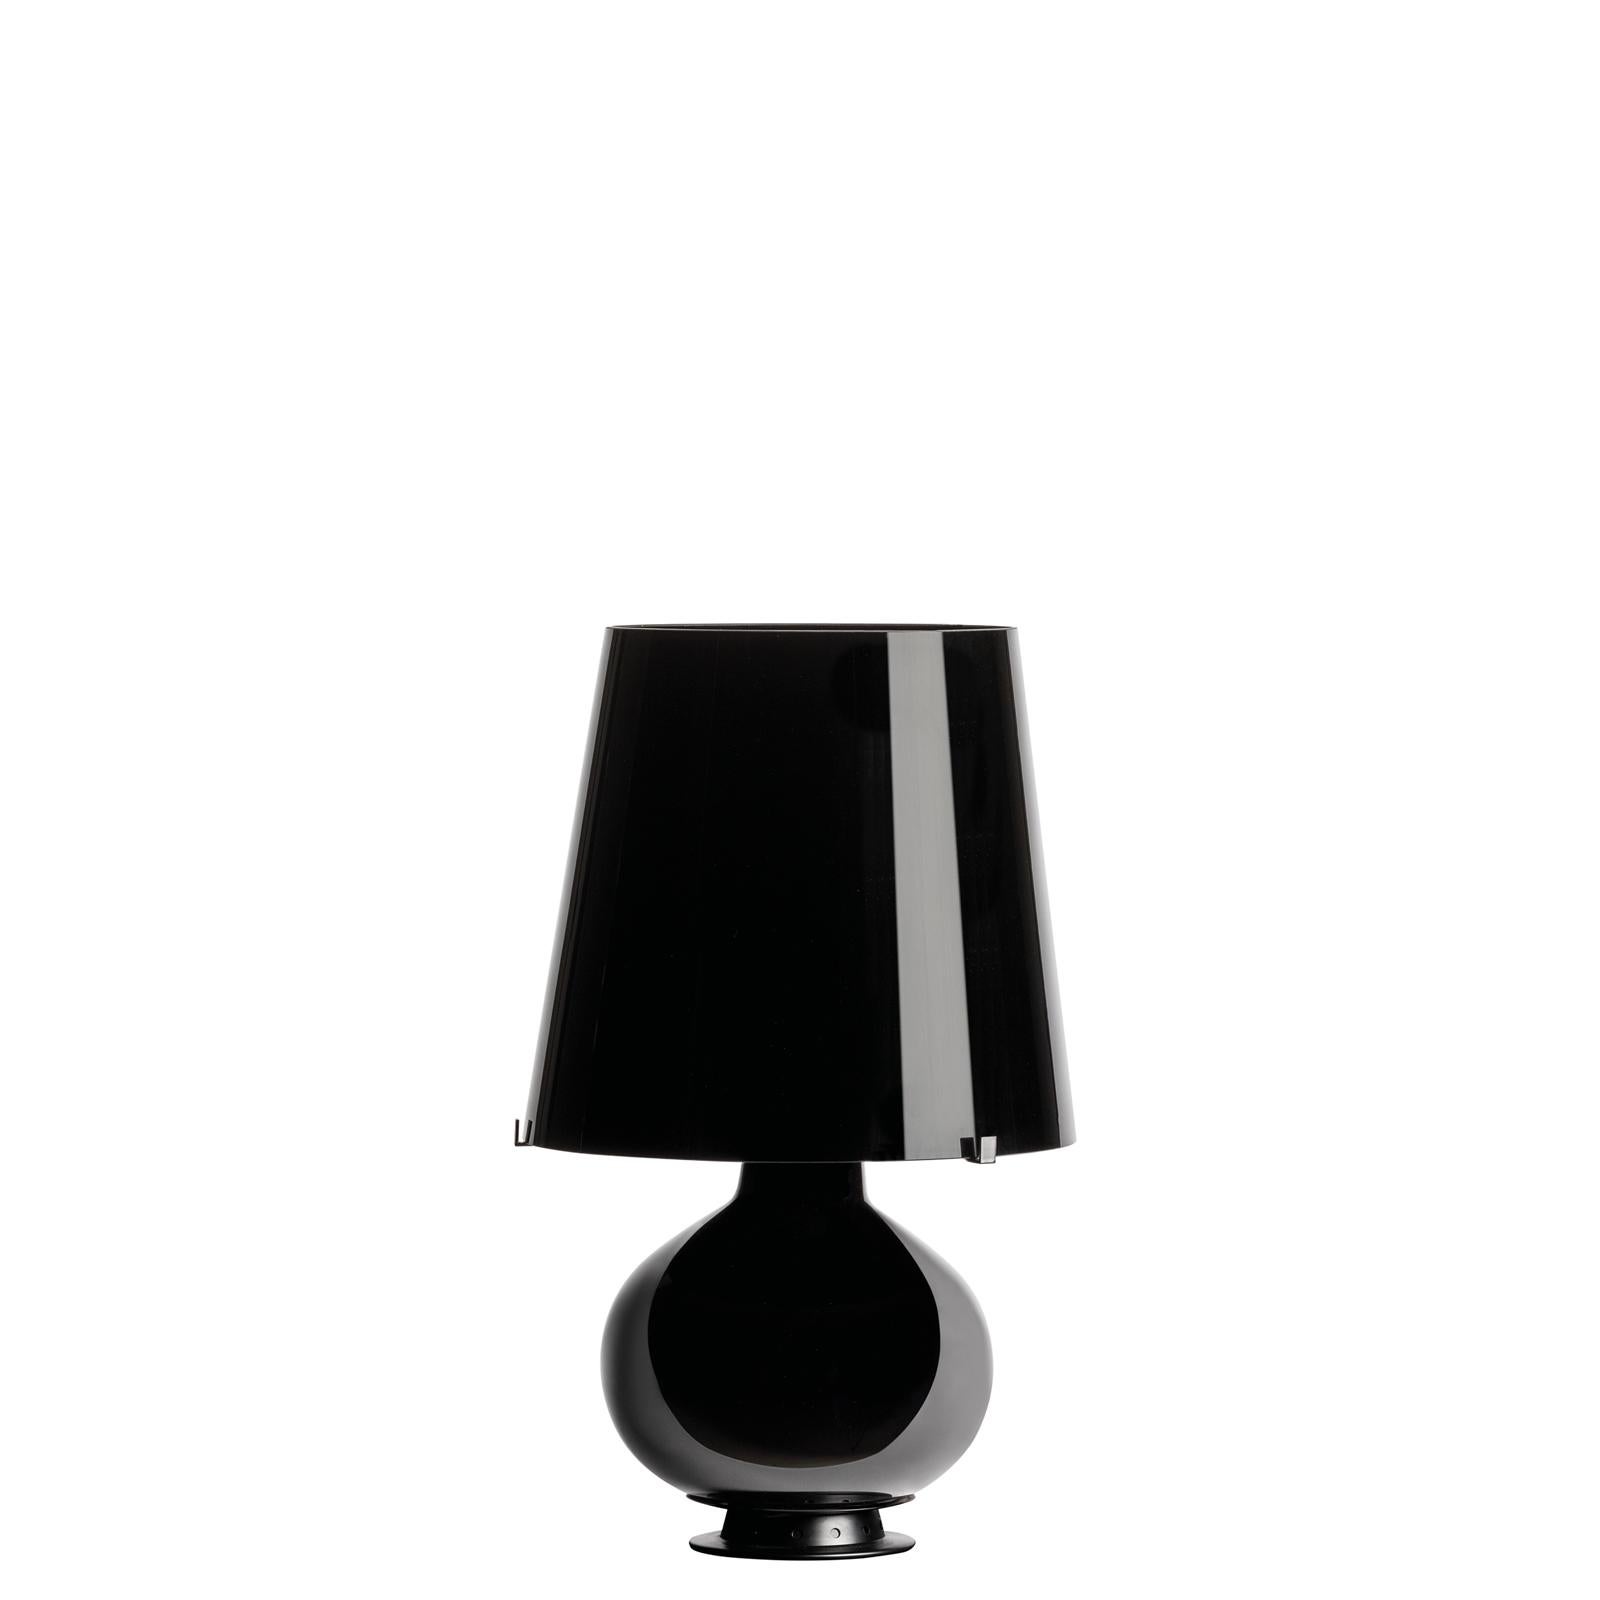 Blown Glass Max Ingrand Fontana Arte Fontana Total Black Table Lamp in Glass, 2014 Edition For Sale